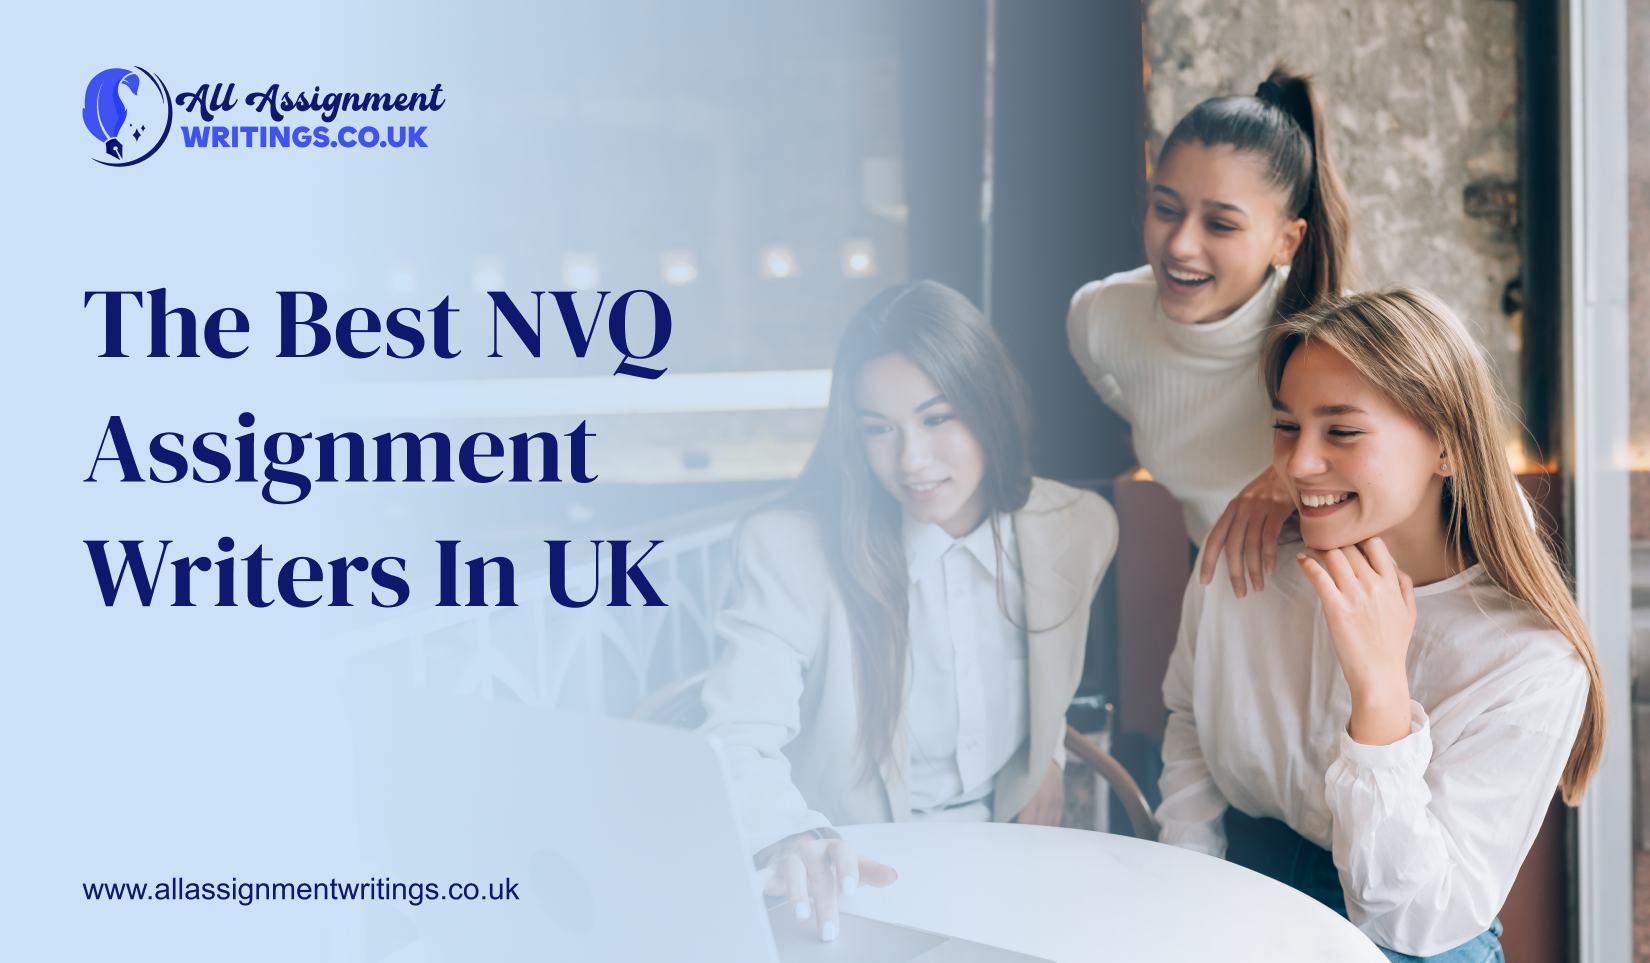 The Best NVQ Assignment Writers in UK